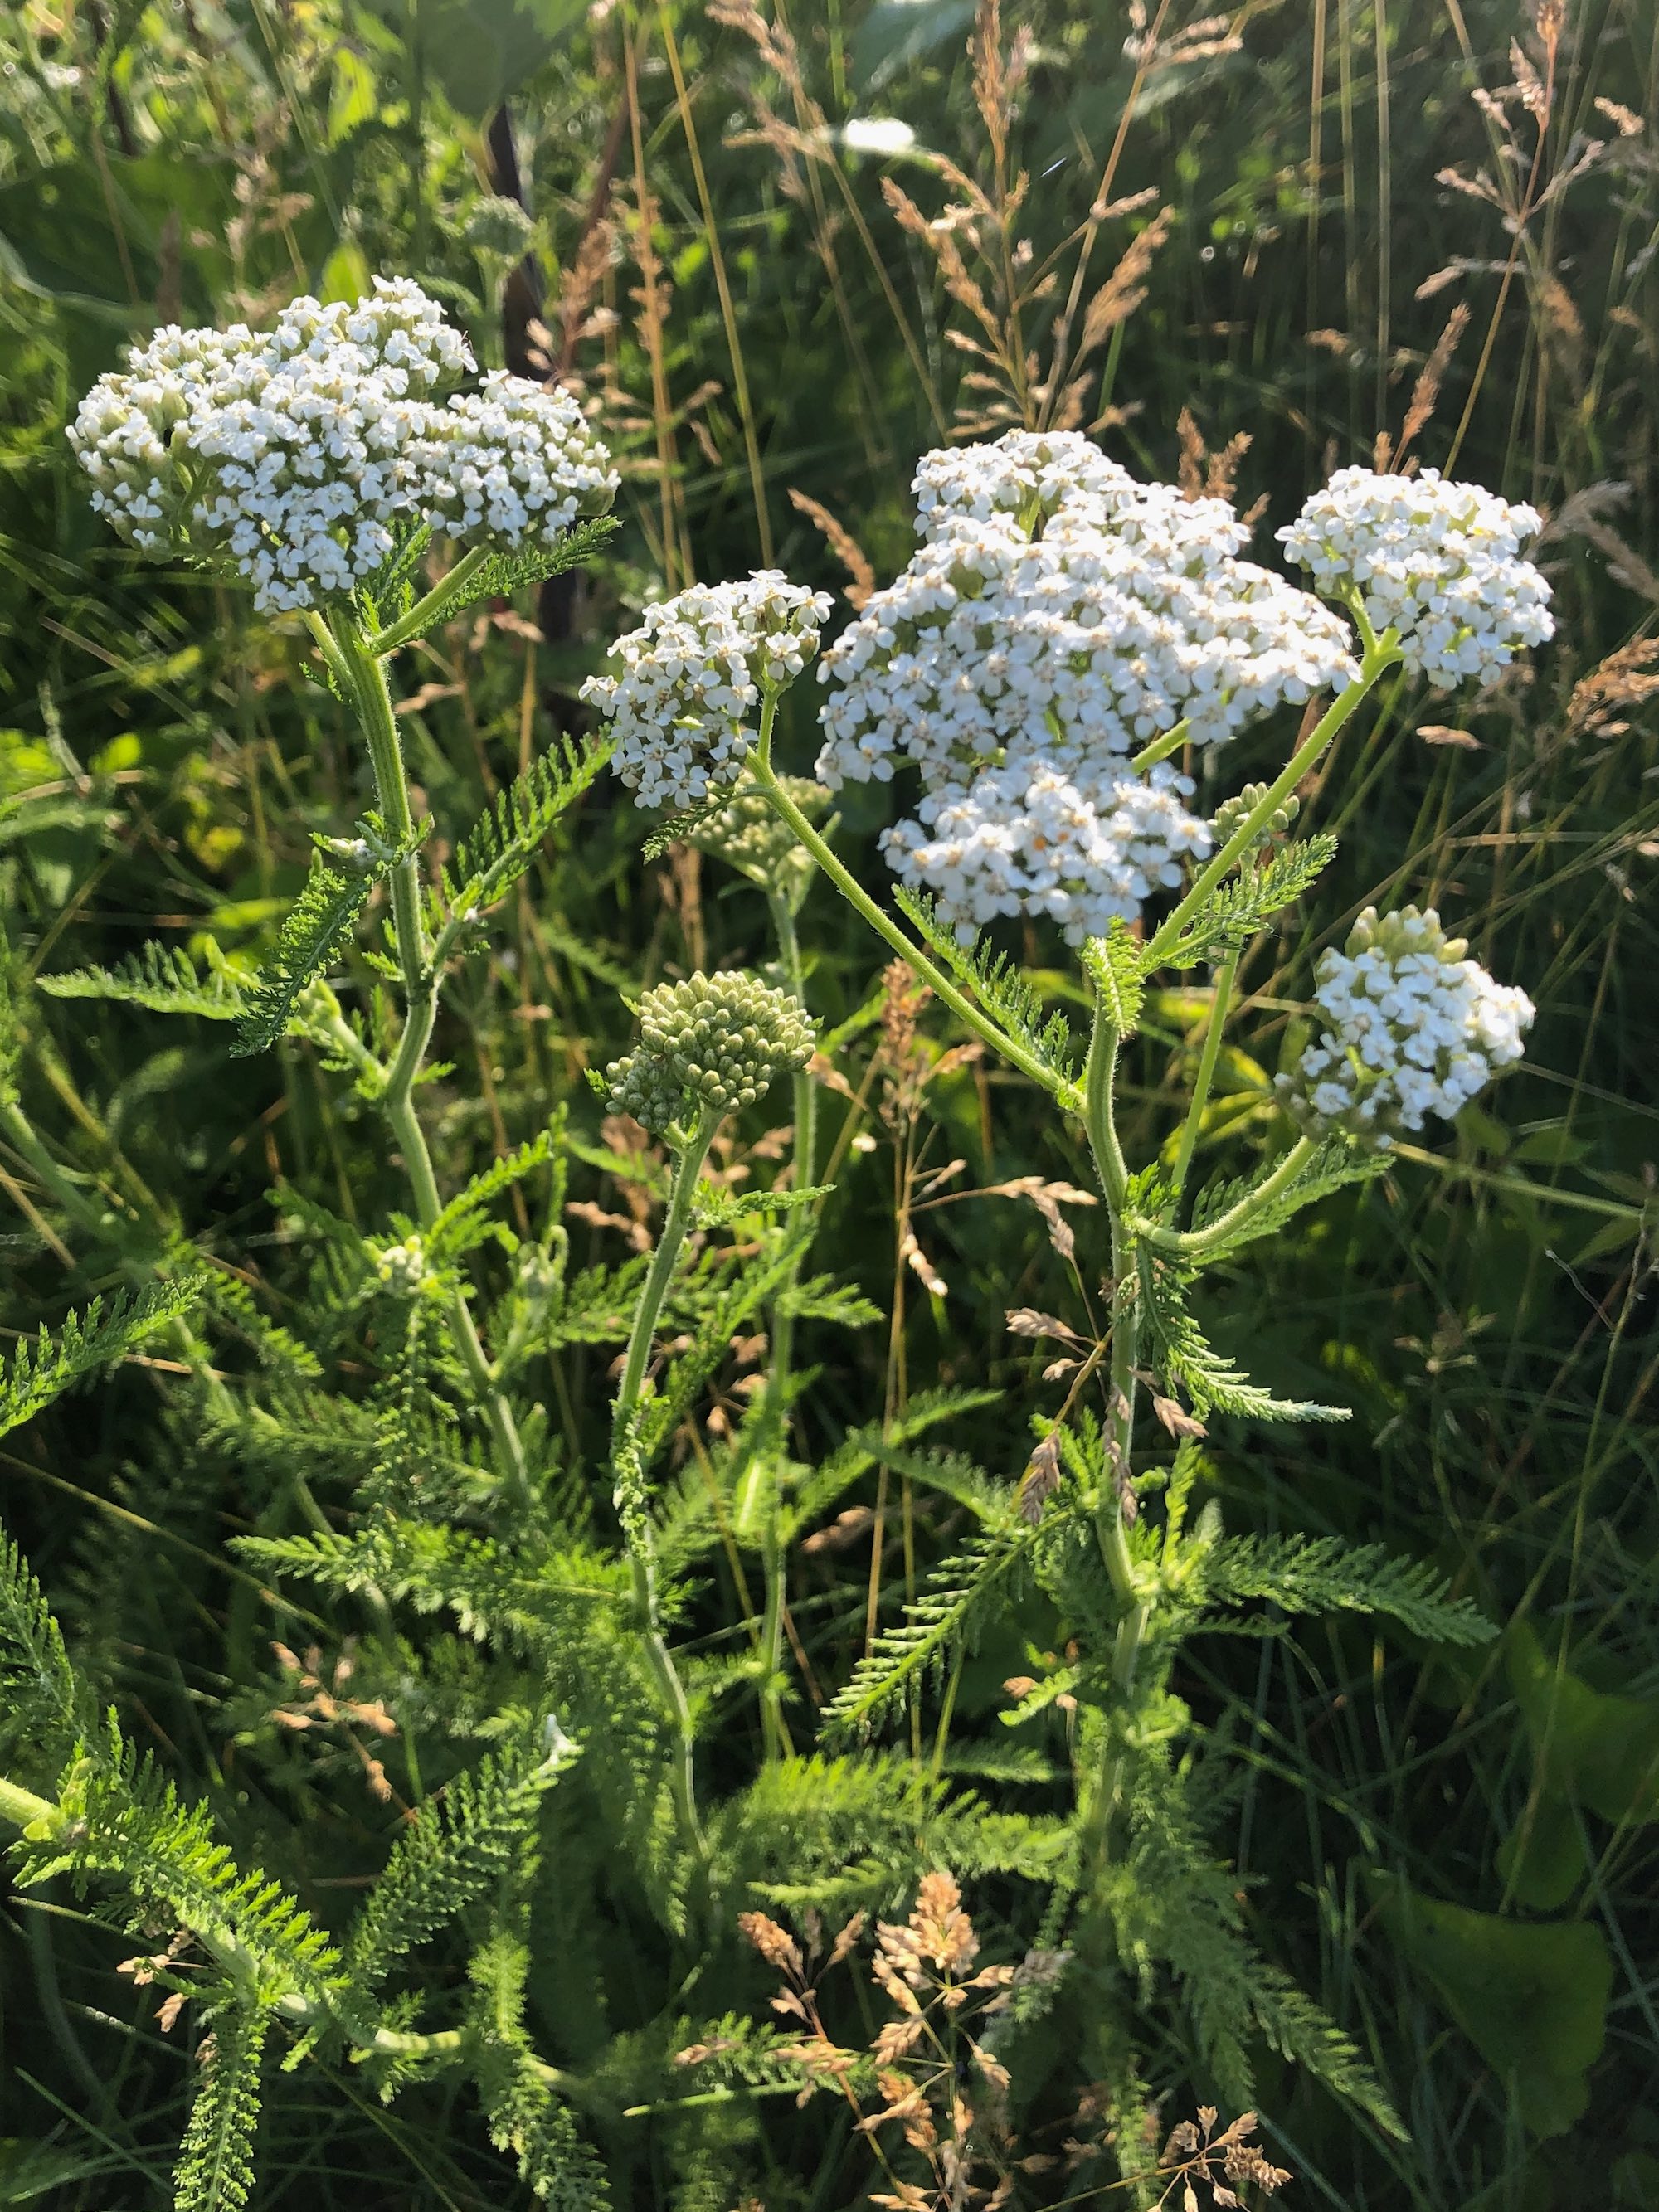 Common Yarrow on shore of Marion Dunn Pond on June 18, 2020.